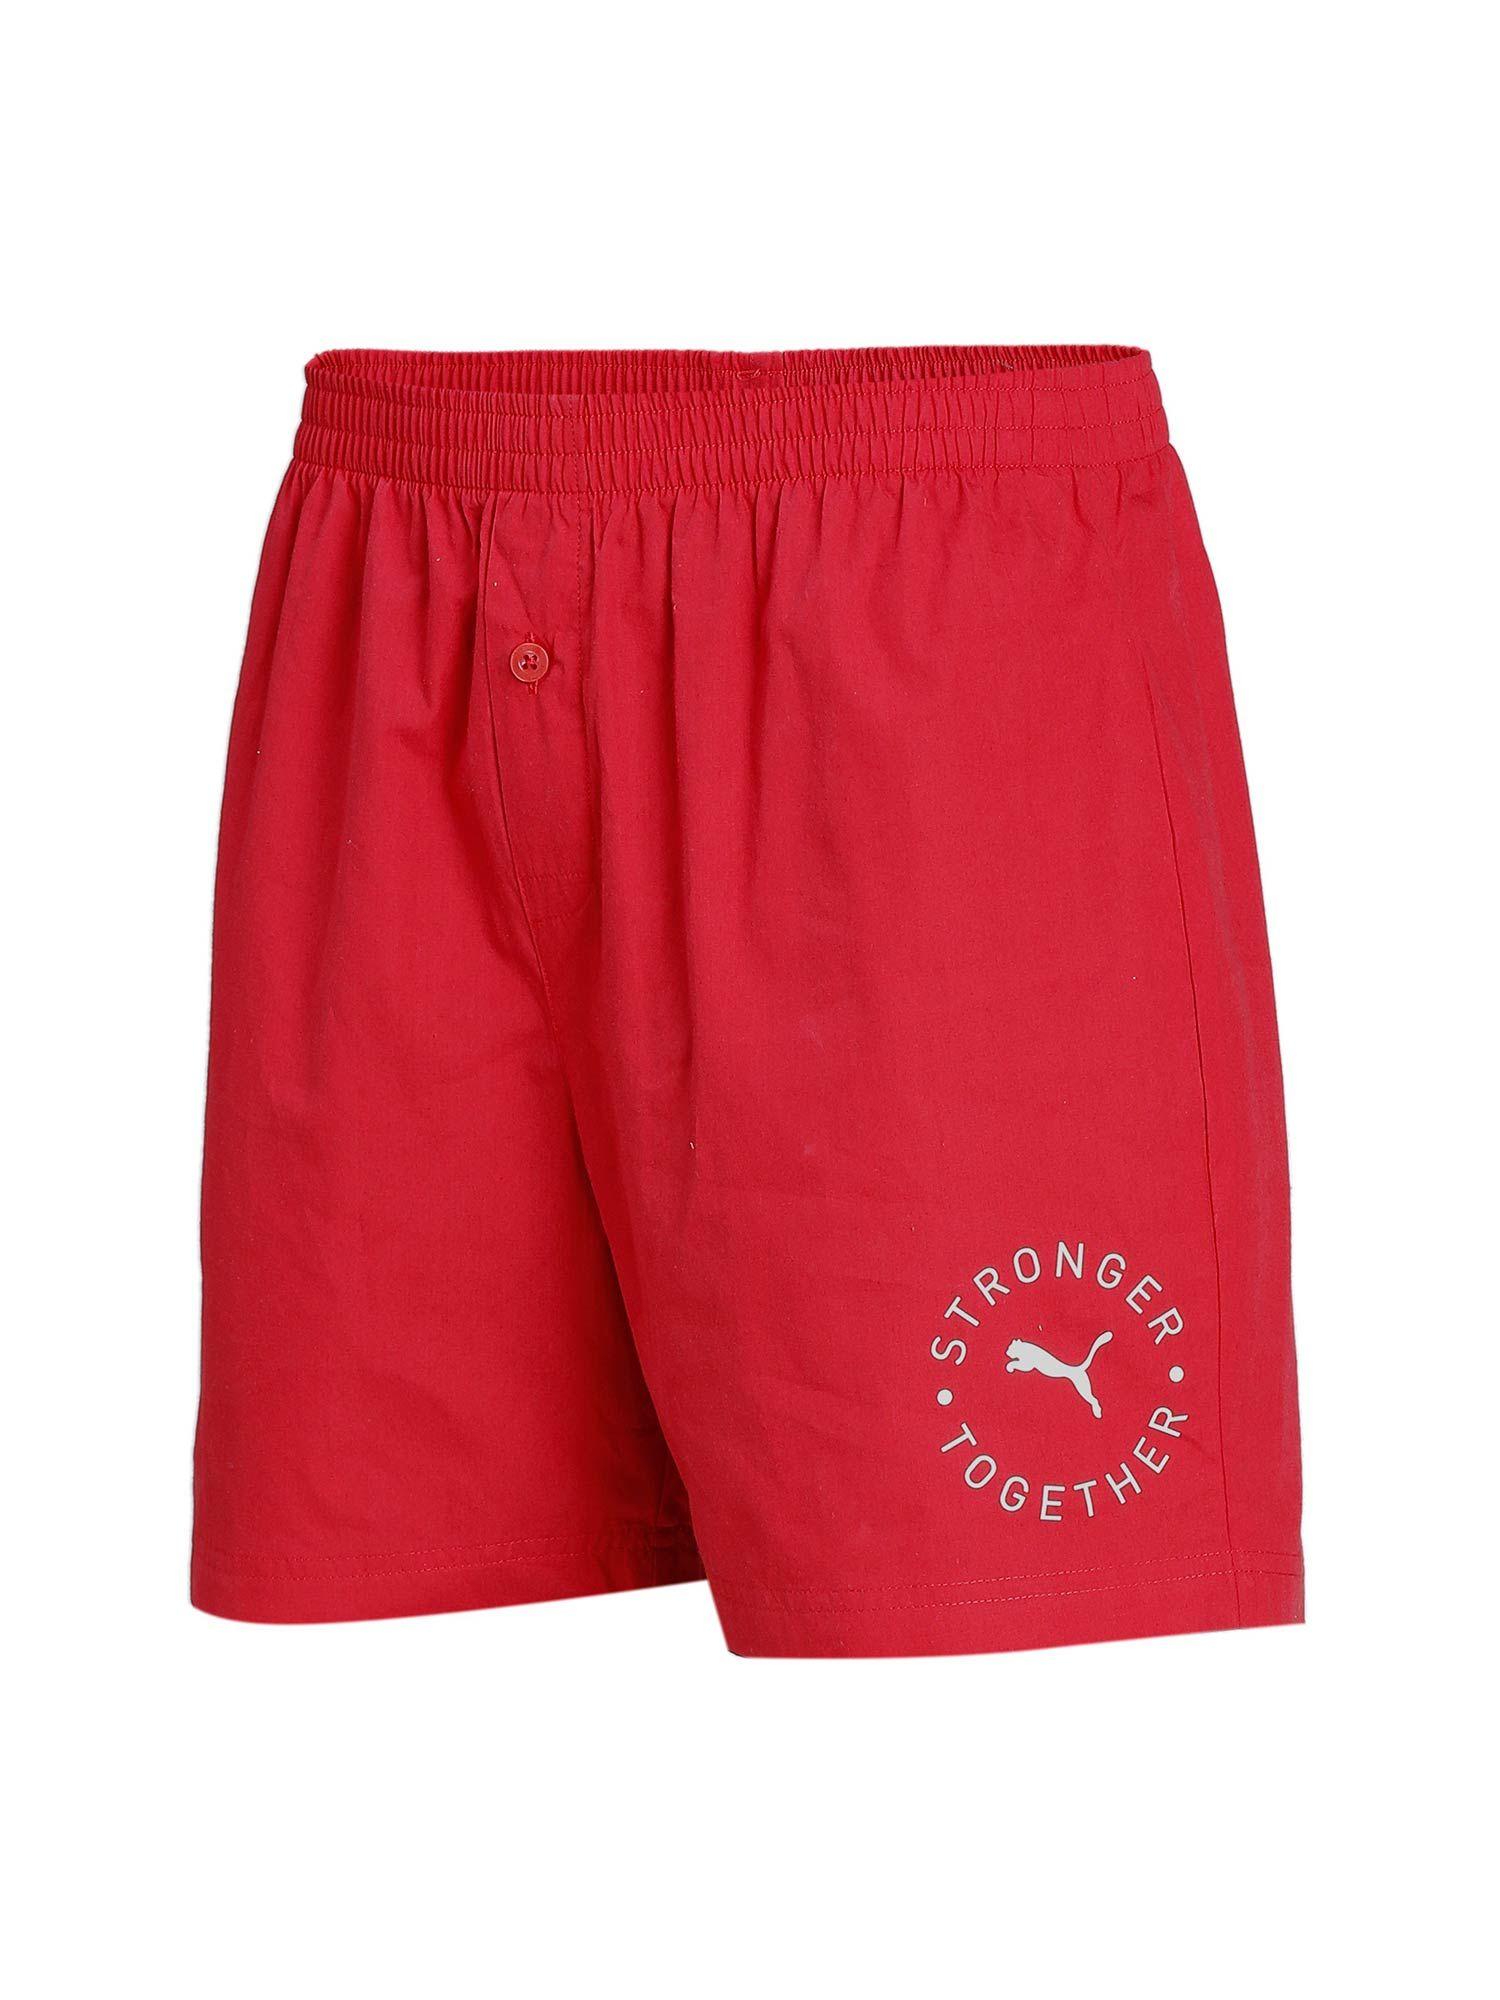 stretch-mens-red-basic-boxer